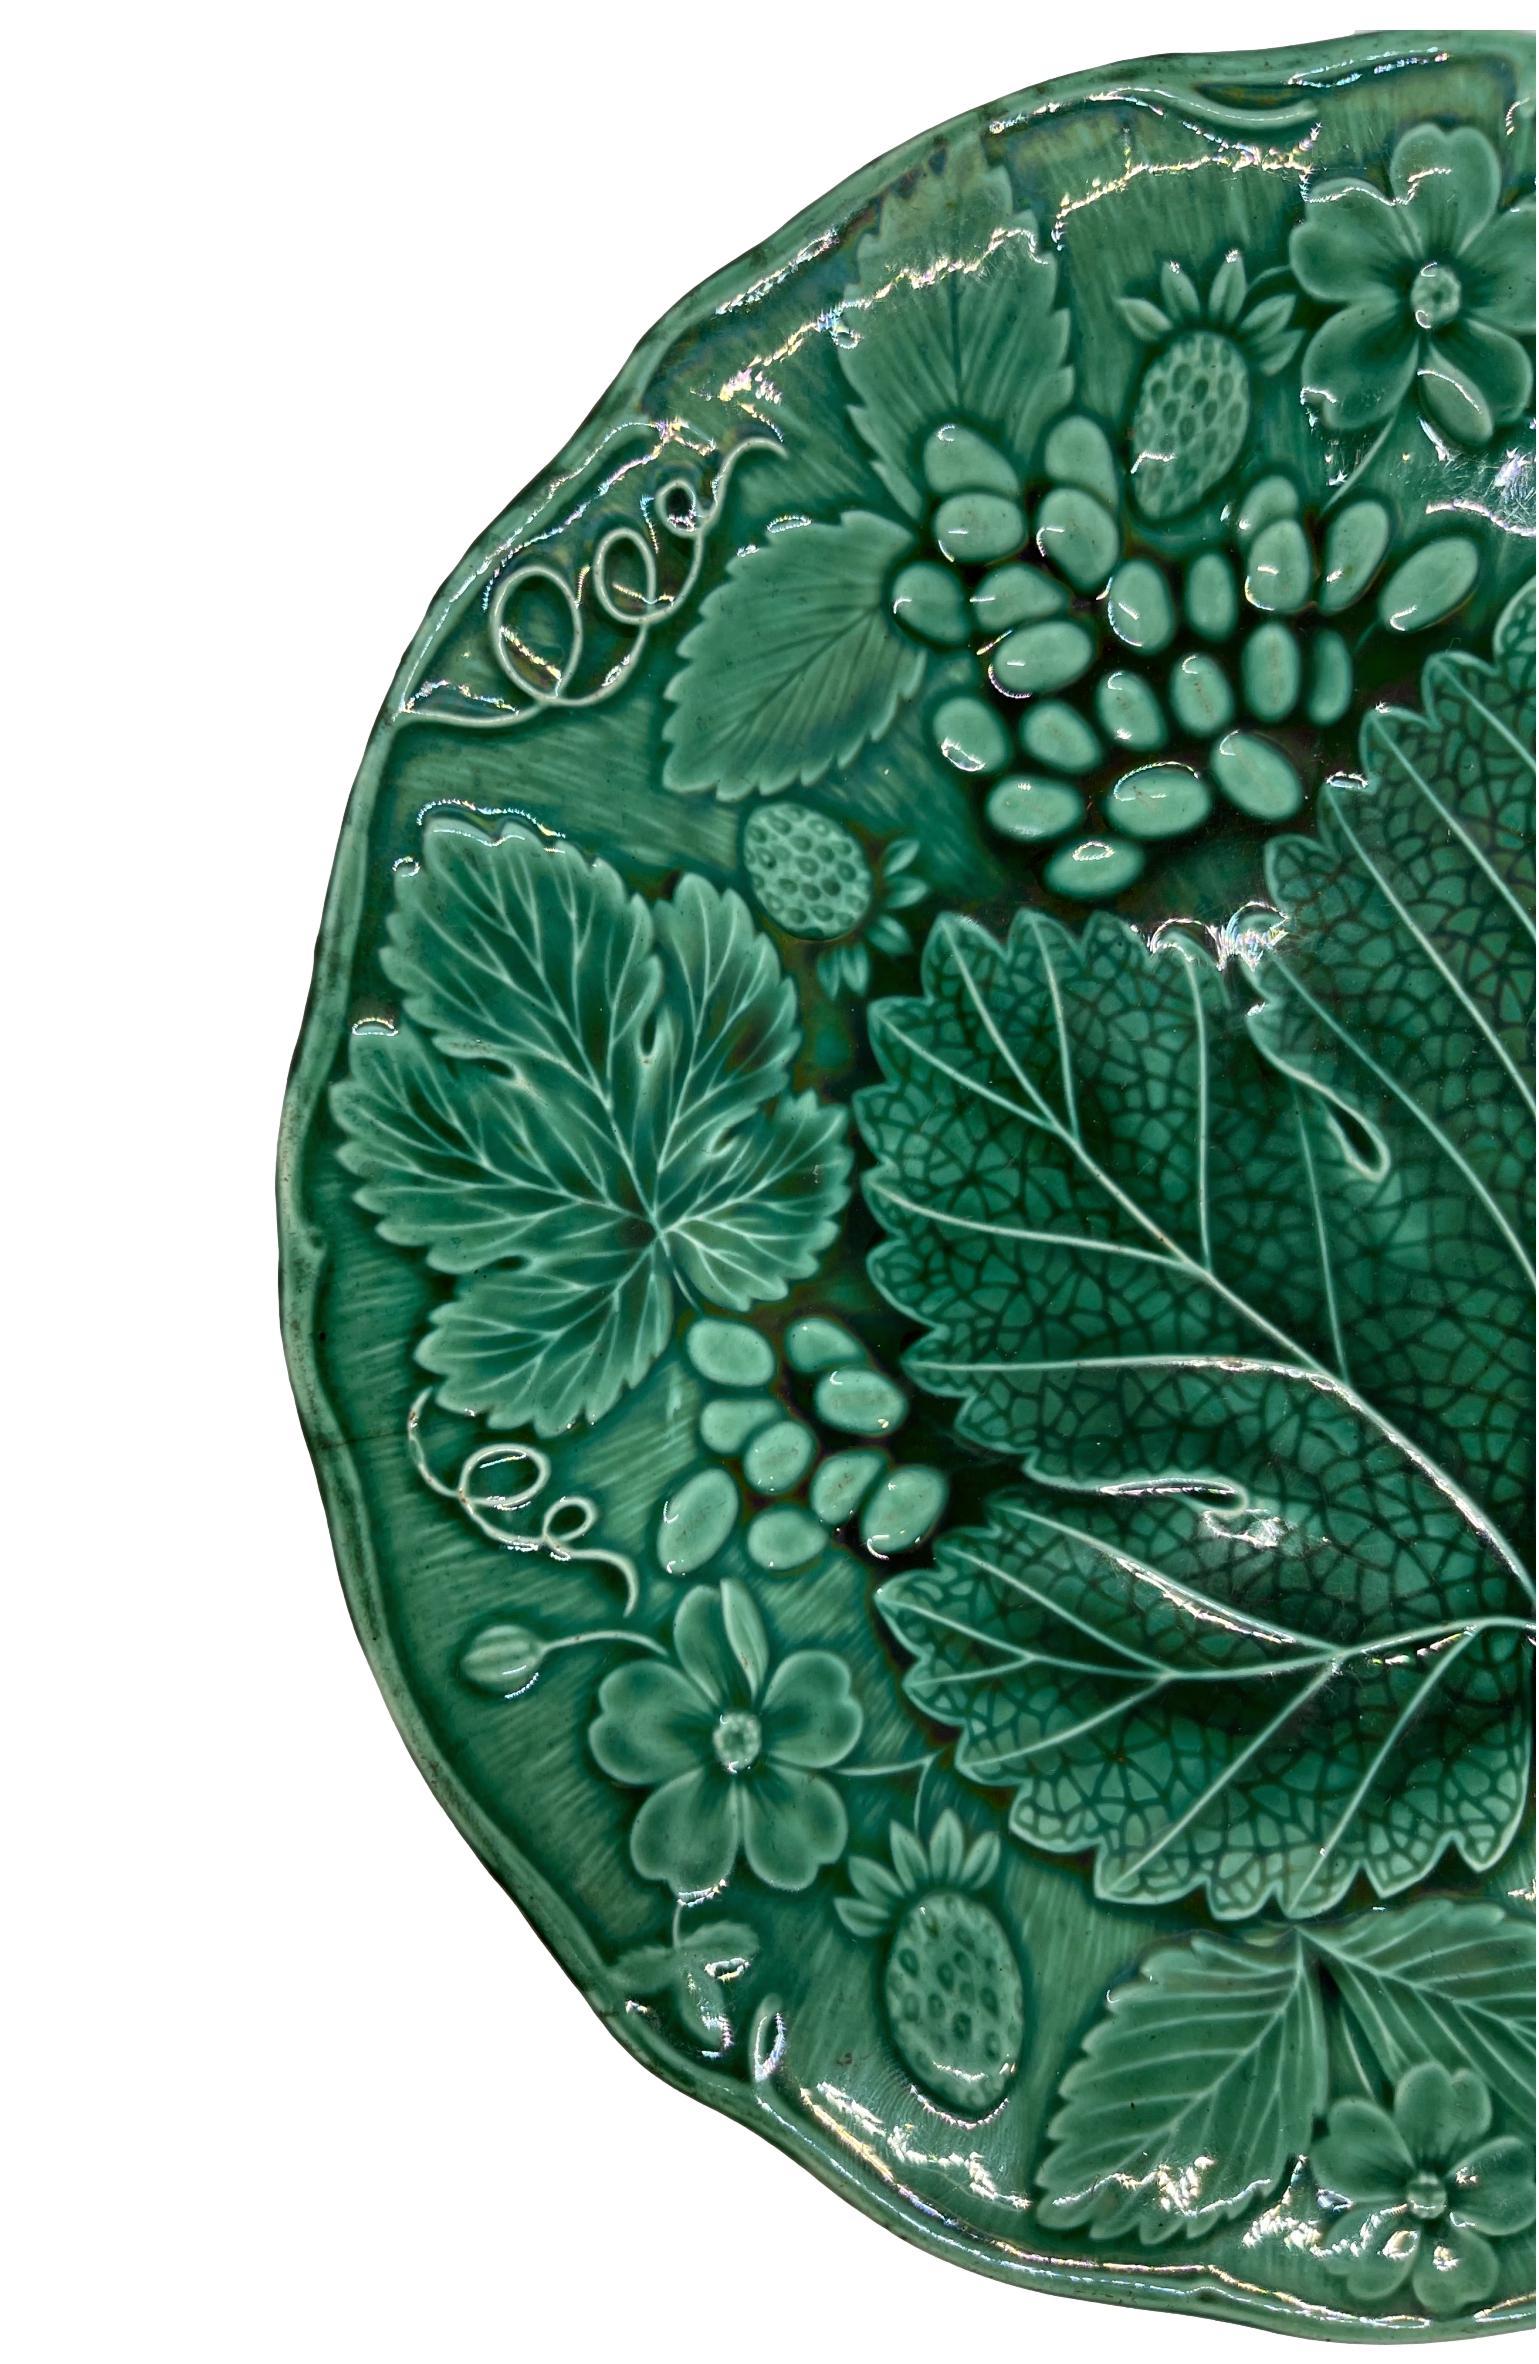 Green Majolica strawberry dessert plate, English, molded with strawberries and strawberry leaves, English, ca. 1880.